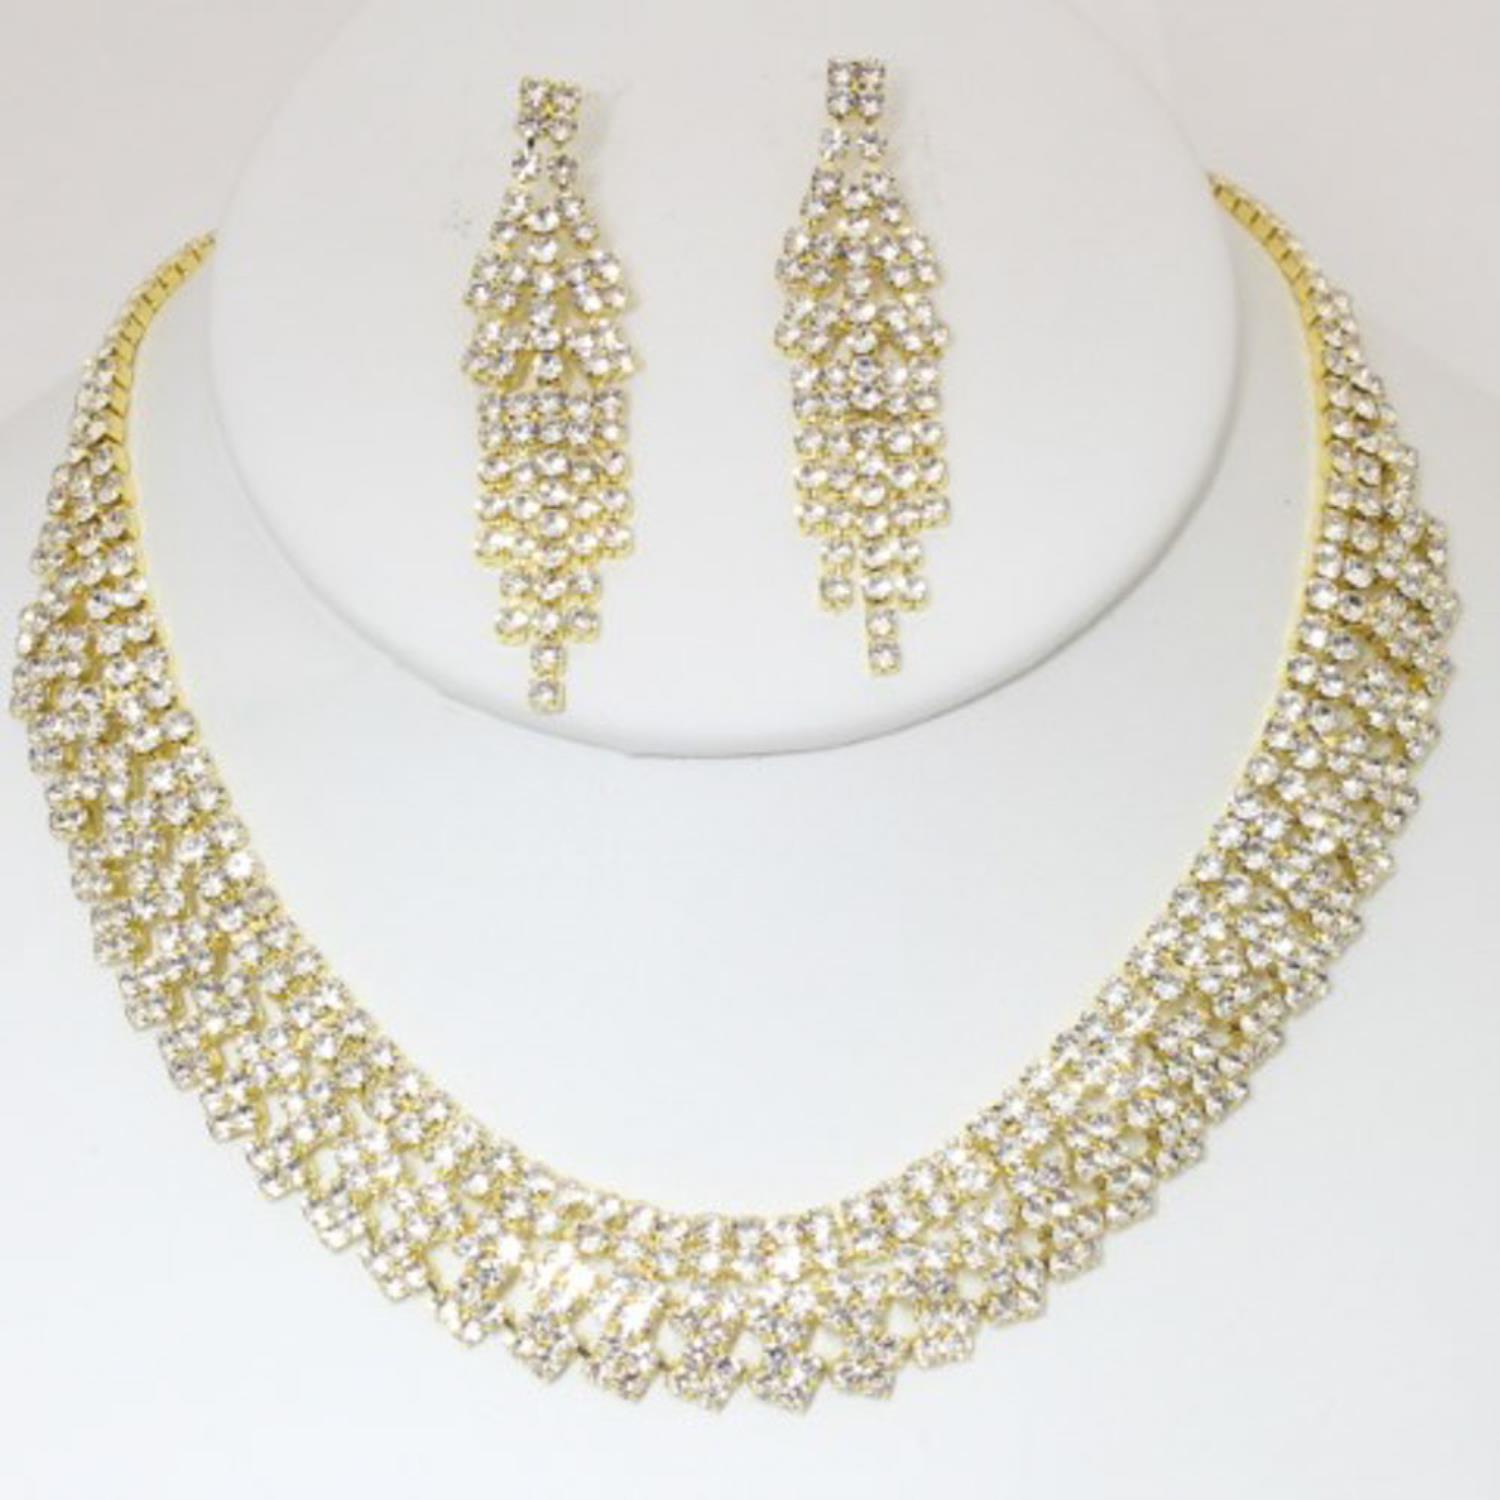 GOLD - Rhinestone Necklace Earring Set - Ships from The US - necklace at TFC&H Co.